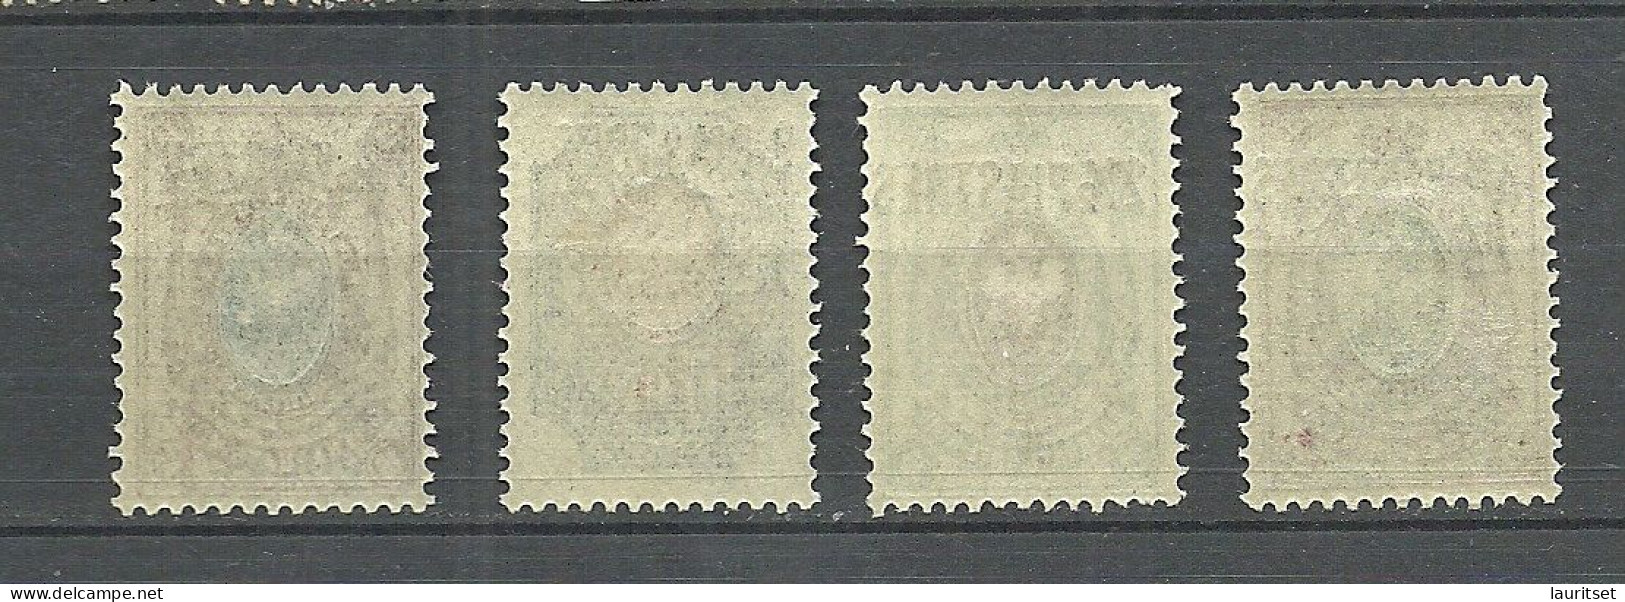 RUSSLAND 1920 Civil War Wrangel Army Camp Post At Gallipoli On Levante Levant OPT Stamps * - Wrangel Army